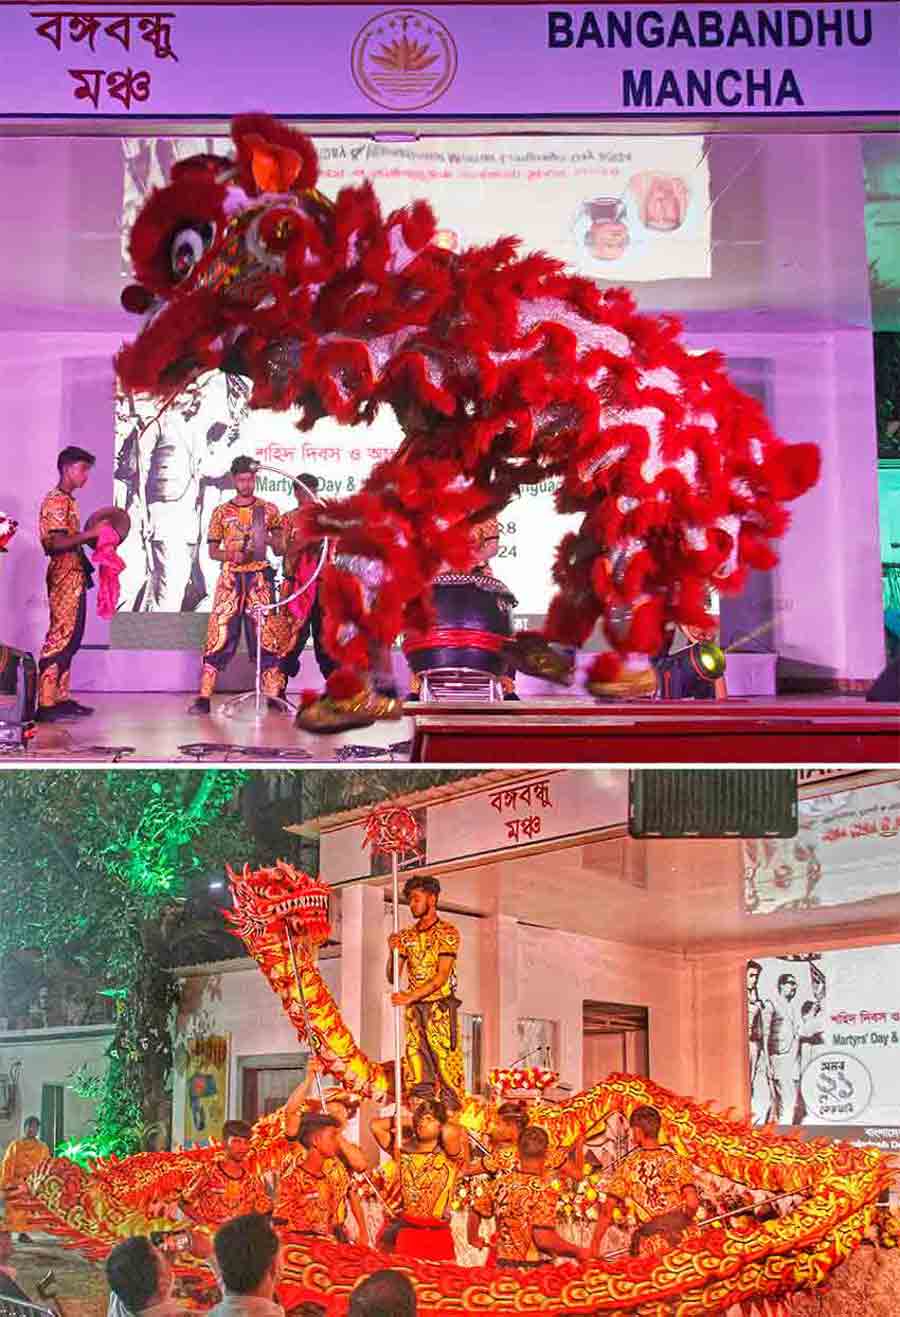 Cultural programmes were held at the Bangladesh Deputy High Commission in Kolkata on the occasion of Bhasha Divas, which is also observed as International Mother Language Day, on February 21  